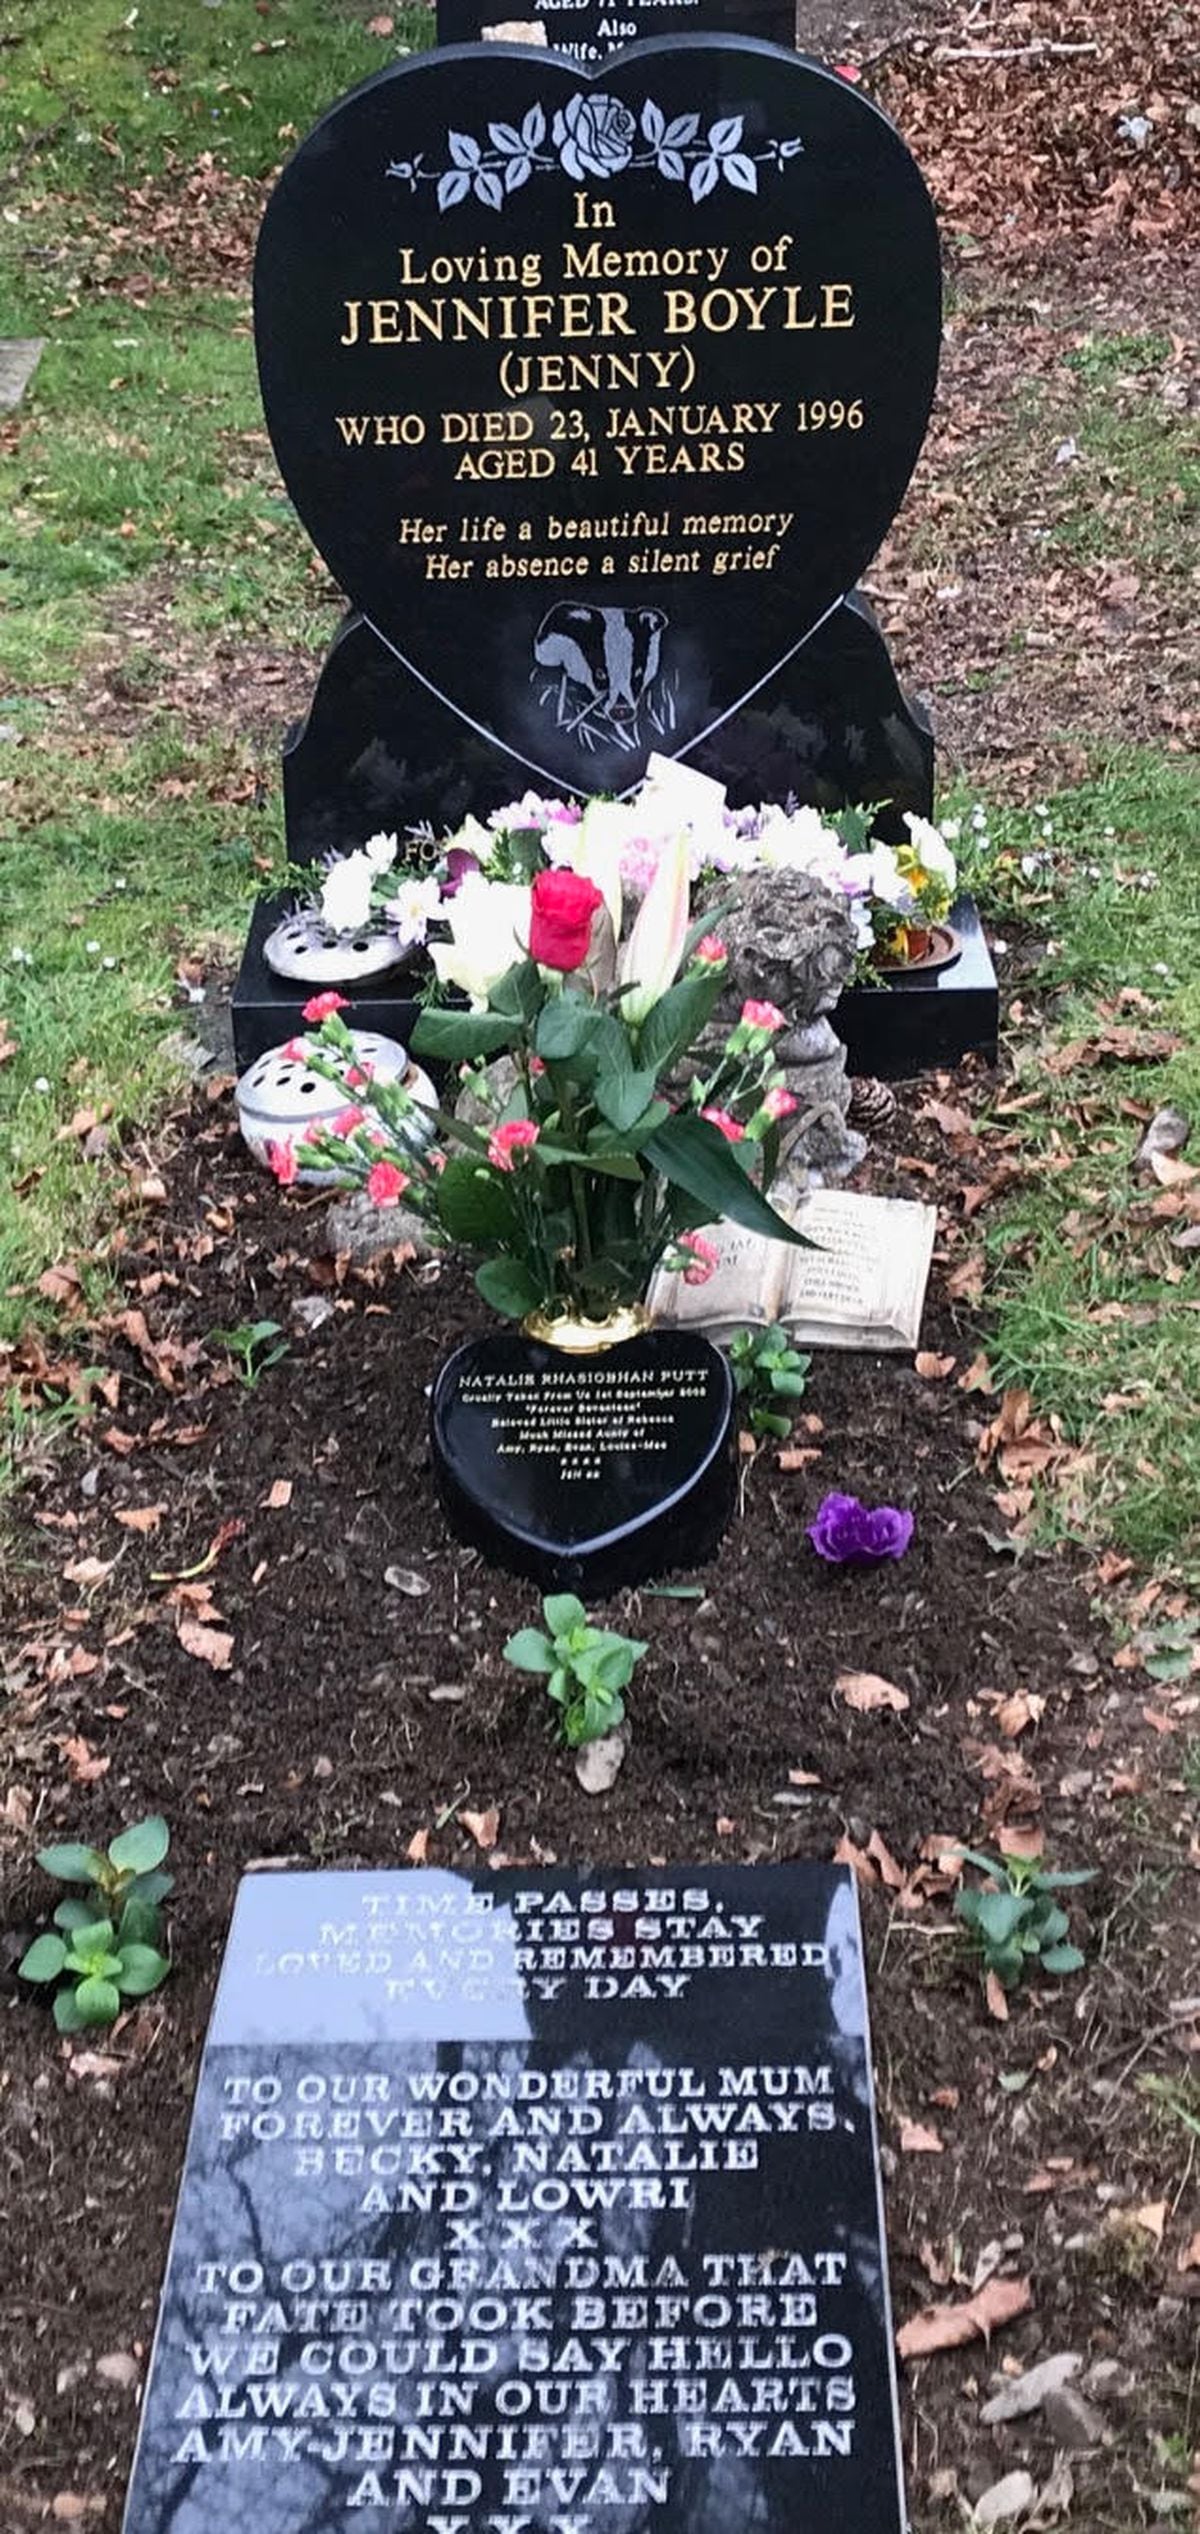 The stone has been laid at Natalie's mother's grave